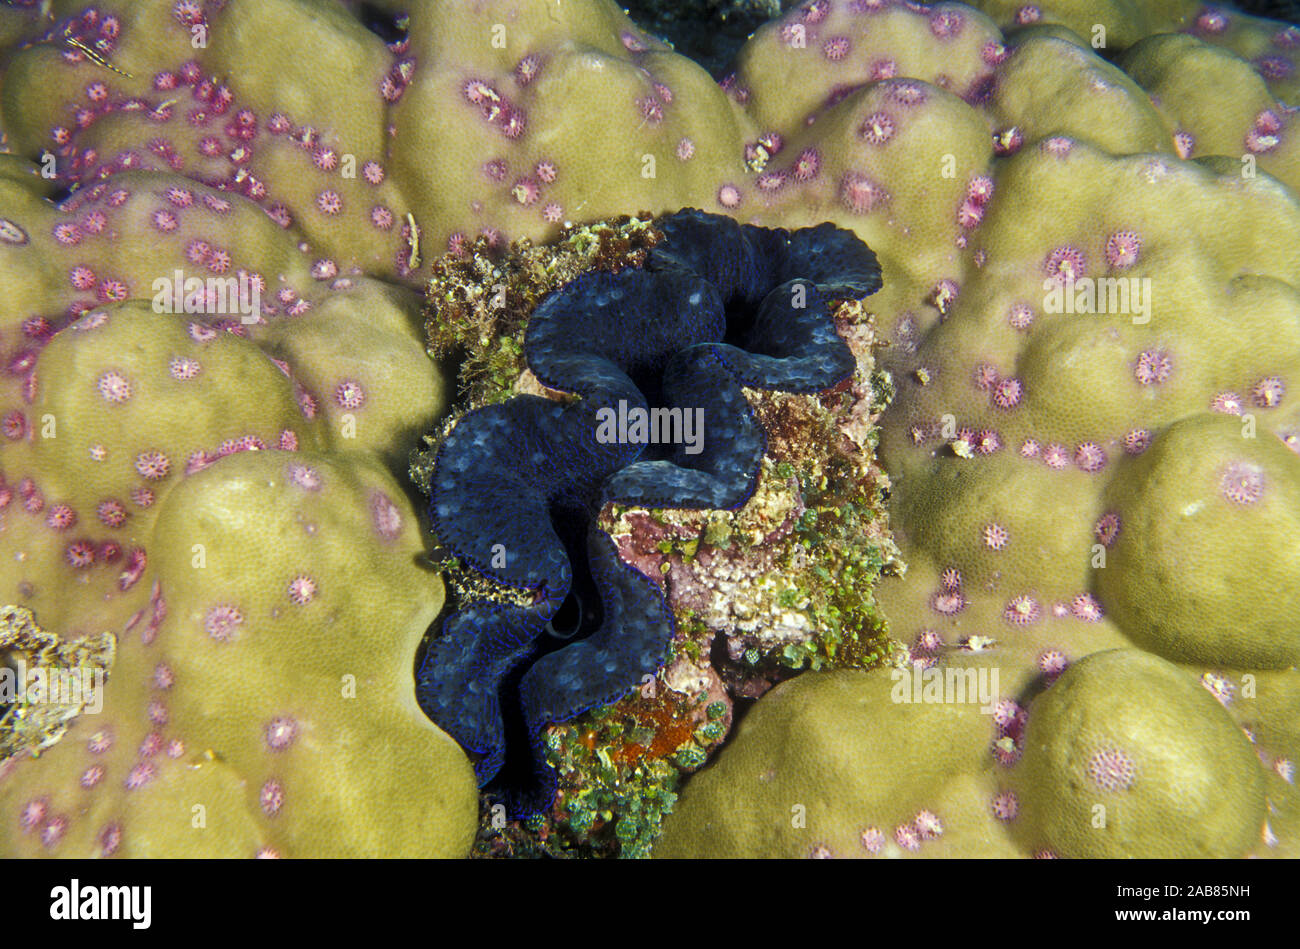 Crocus giant clam (Tridacna crocea), the smallest giant clam; bores deeply into coral boulders. Lady Elliott Island, Great Barrier Reef, Queensland, A Stock Photo